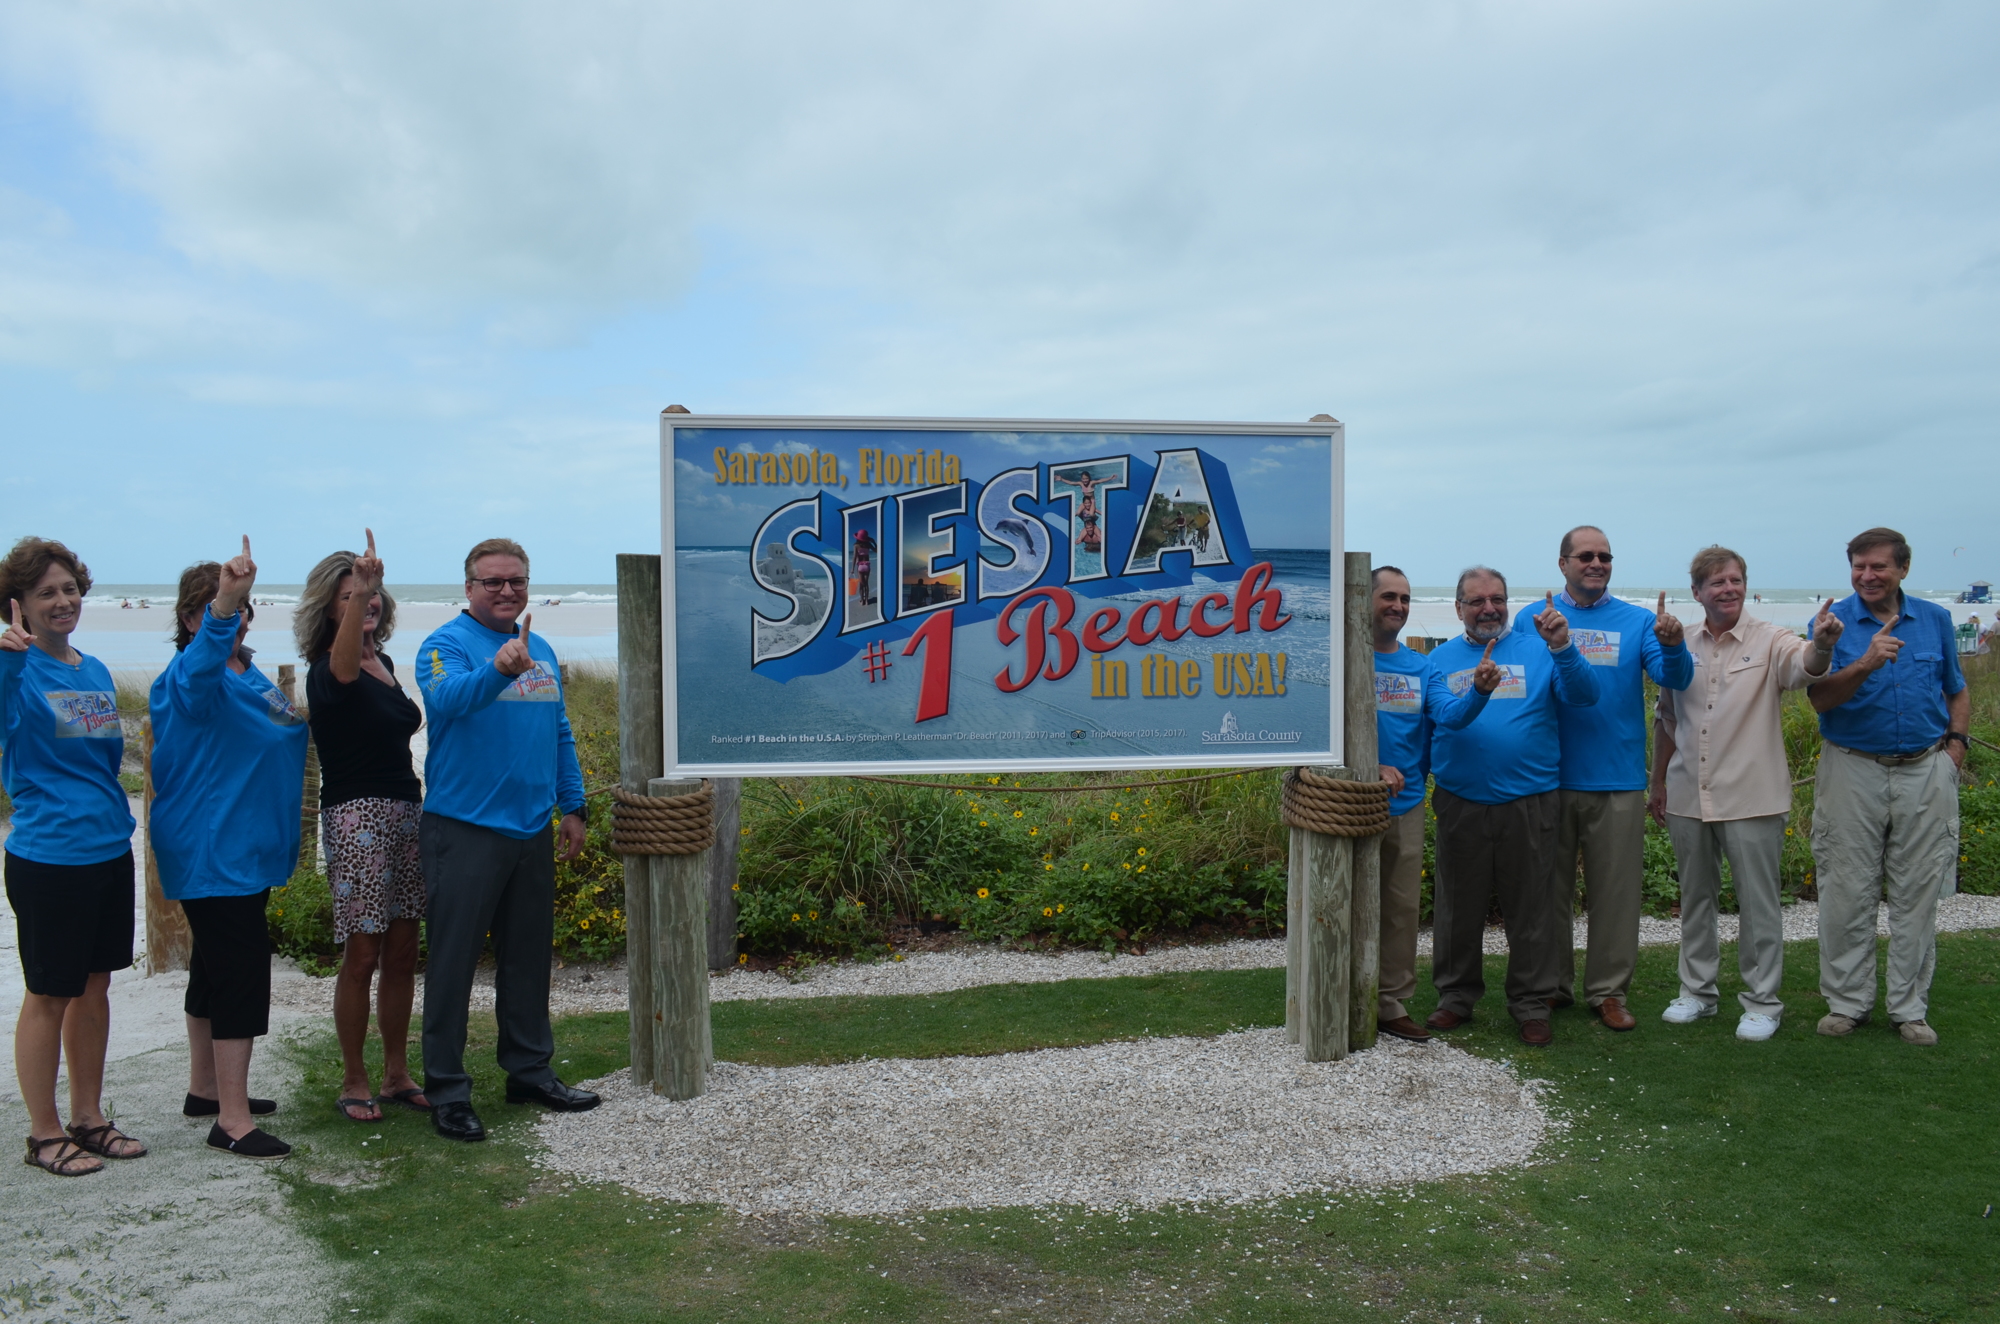 County officials, alongside Stephen Leatherman, unveiled a new sign at Siesta Key Beach on Thursday recognizing the beach's latest honor.